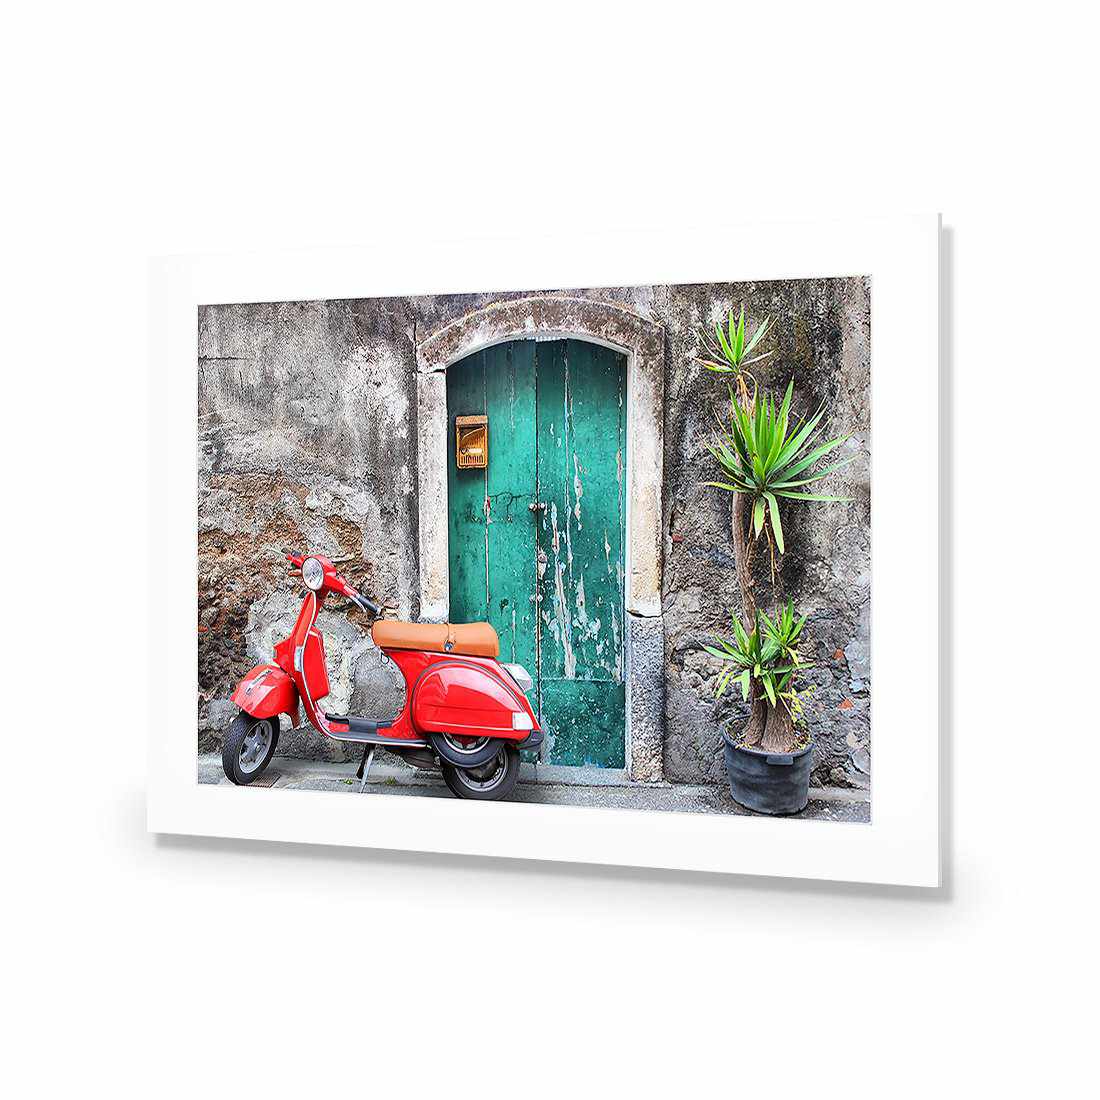 Vintage Door And Scooter-Acrylic-Wall Art Design-With Border-Acrylic - No Frame-45x30cm-Wall Art Designs